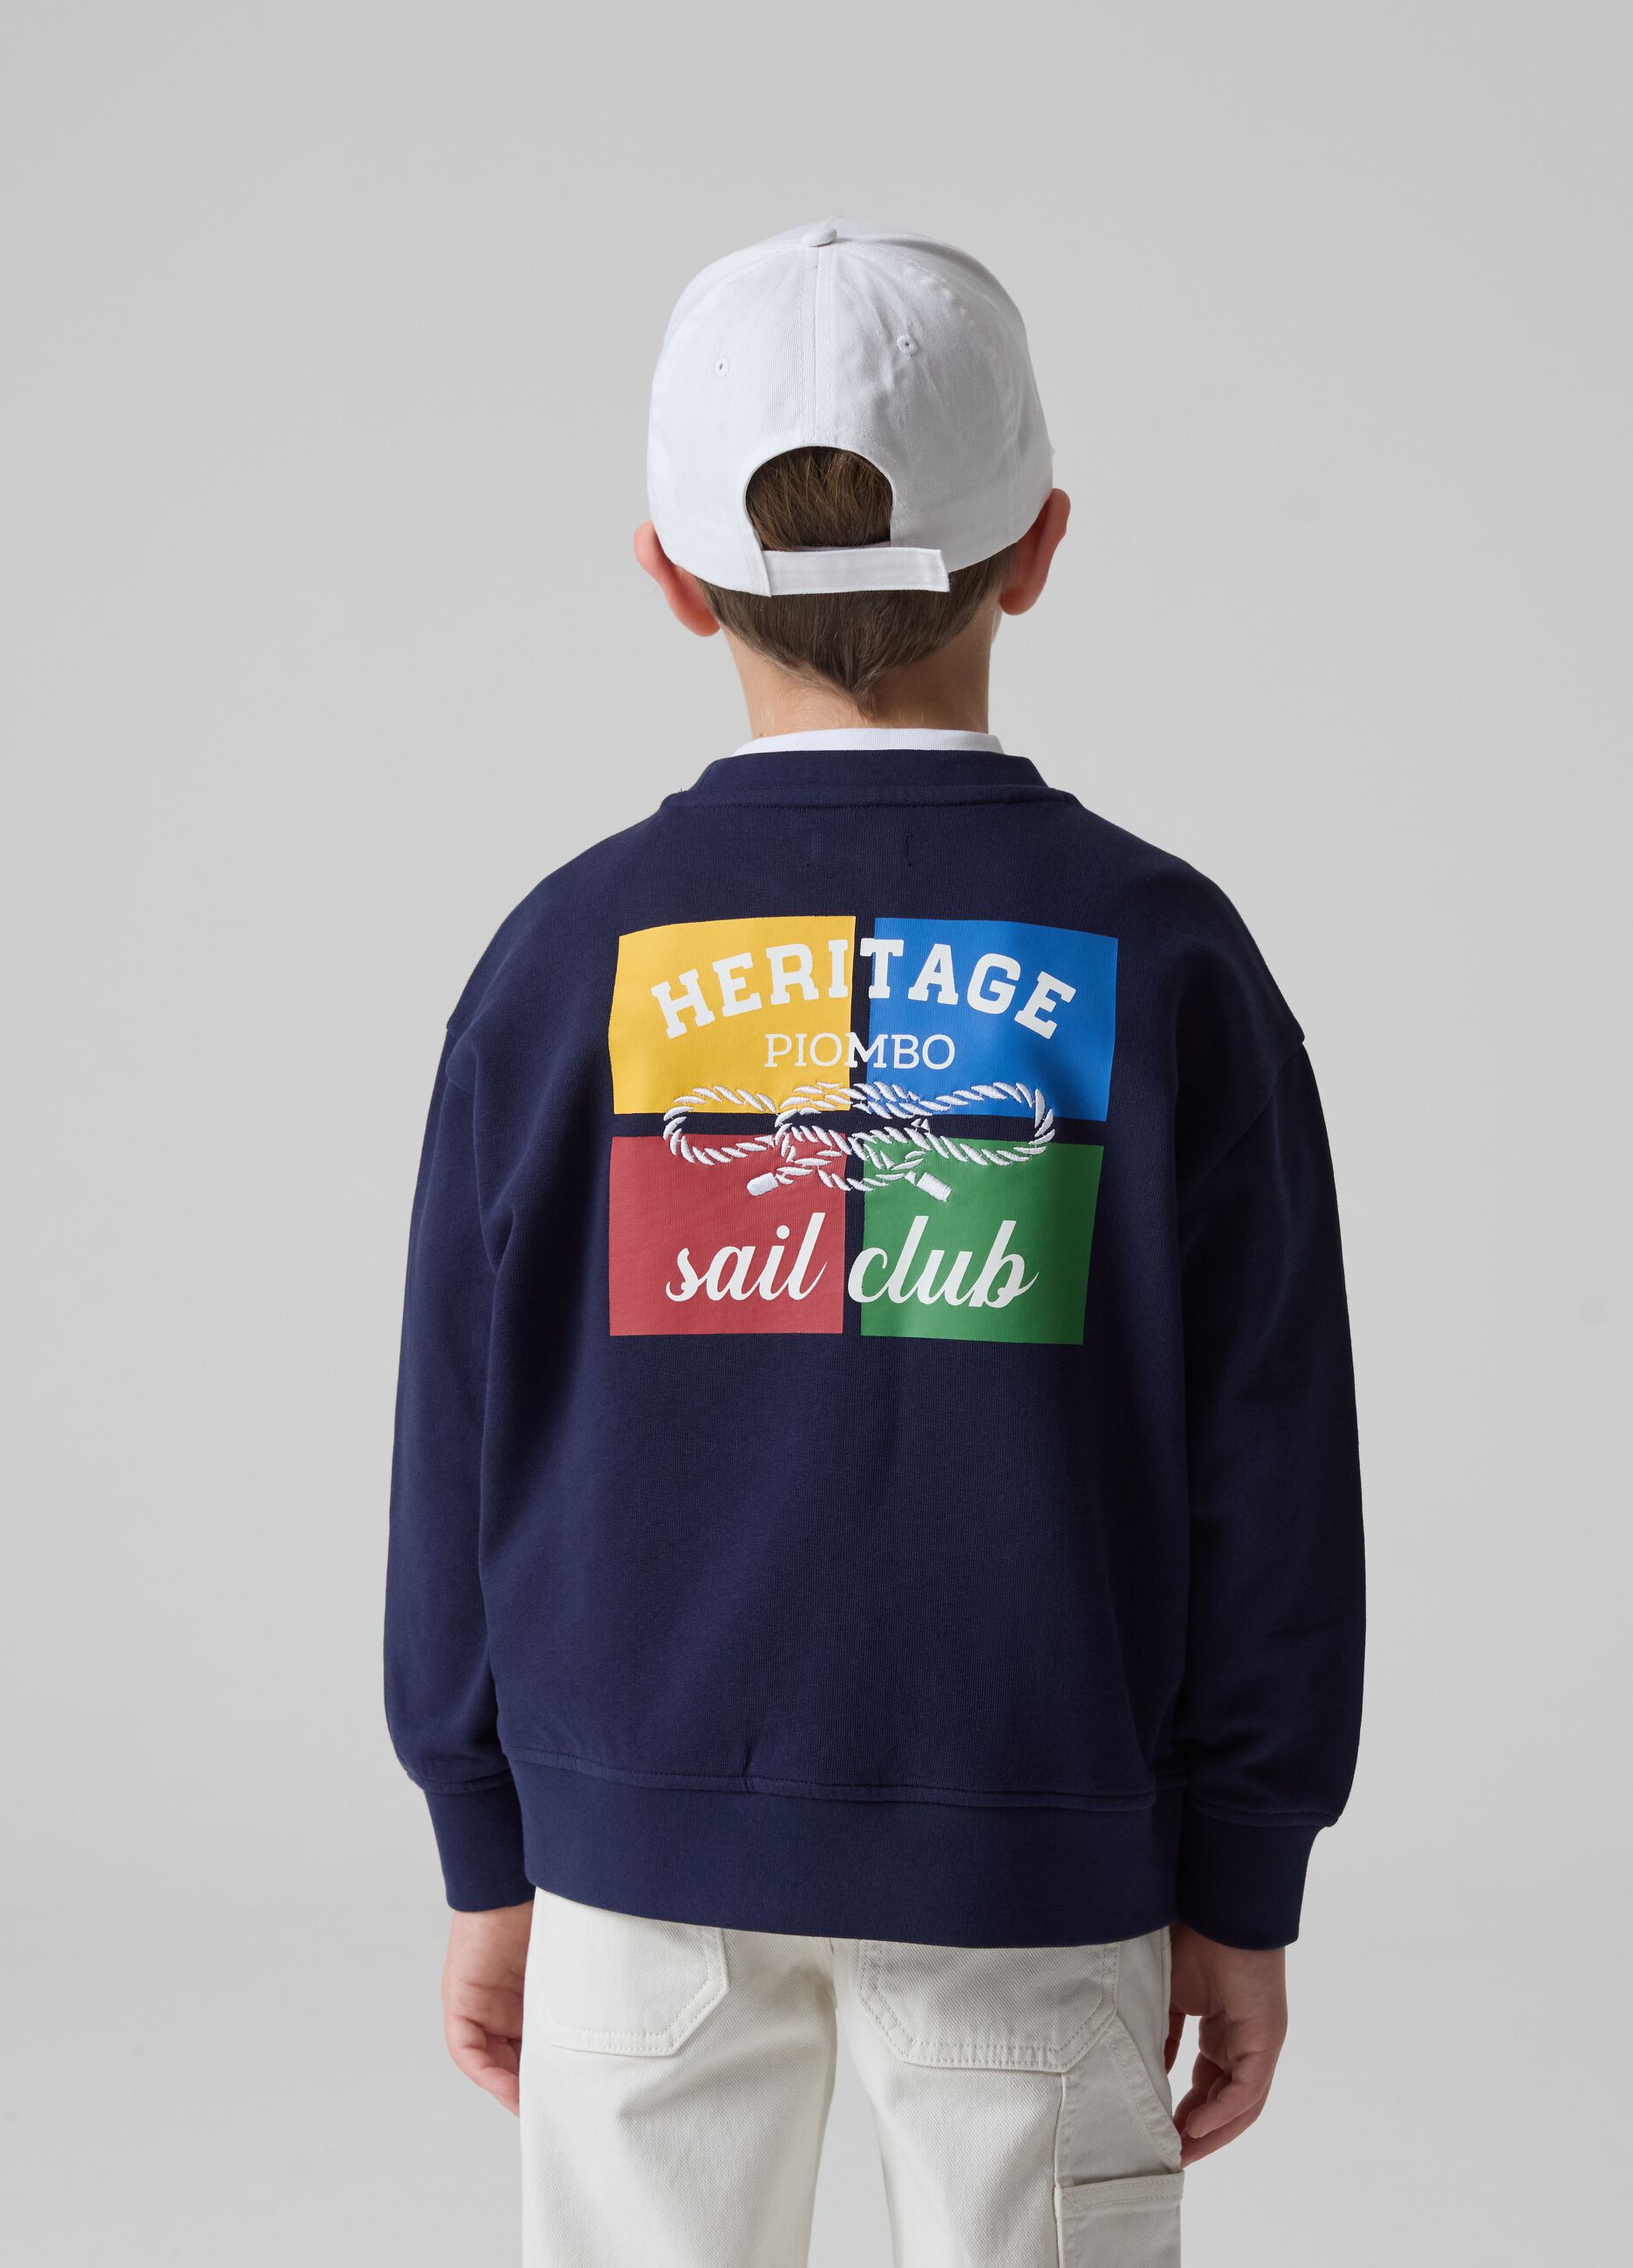 French Terry sweatshirt with print and embroidery